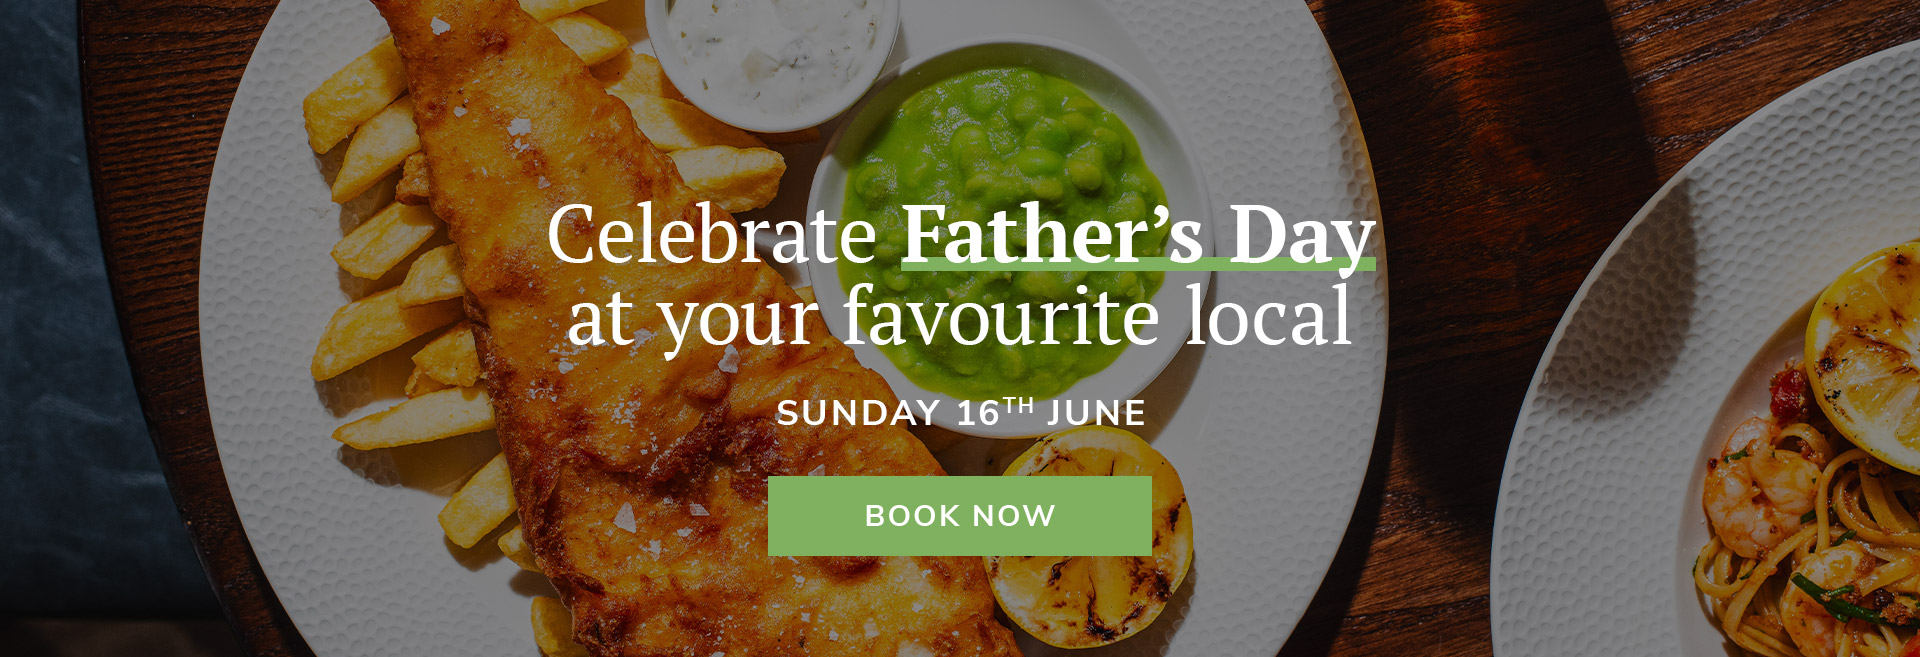 Father's Day at The Jolly Gardeners